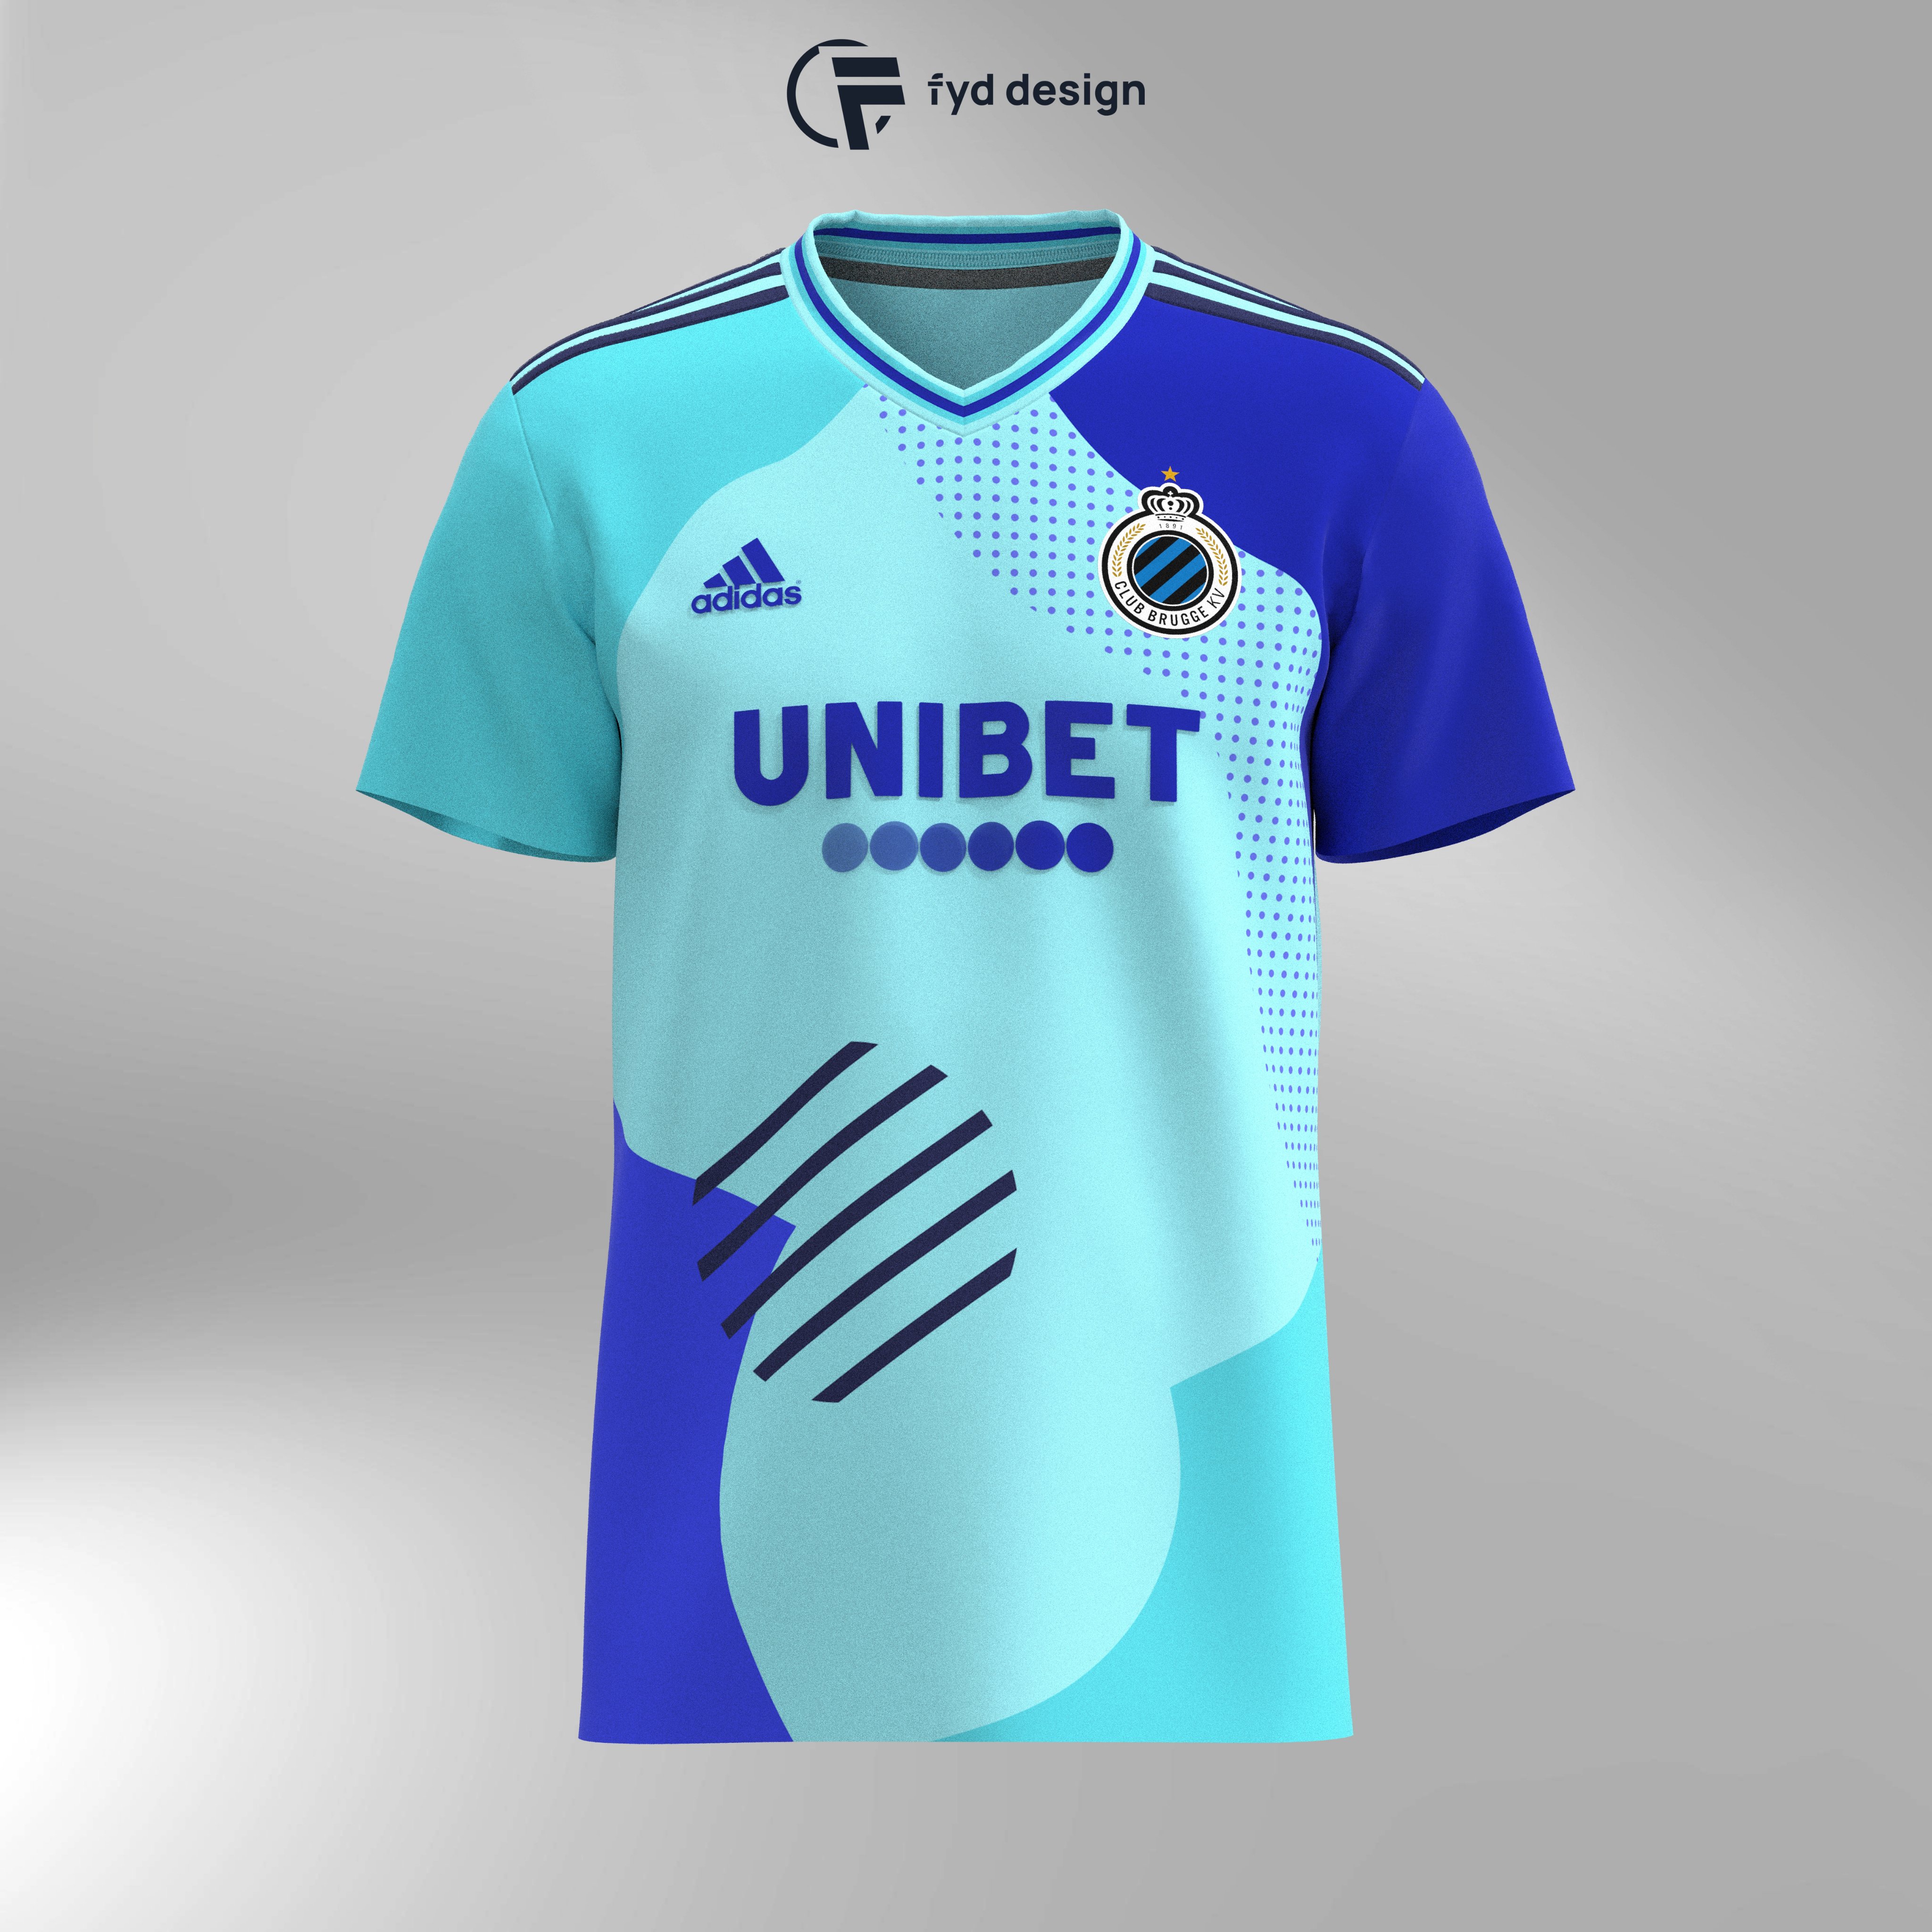 reservedele Byen Humoristisk Fyd Design on Twitter: "Club Brugge/Adidas - Home/away shirt concepts What  presentation do you prefer? This or the previous one?  https://t.co/6zlLh5jmyr" / Twitter